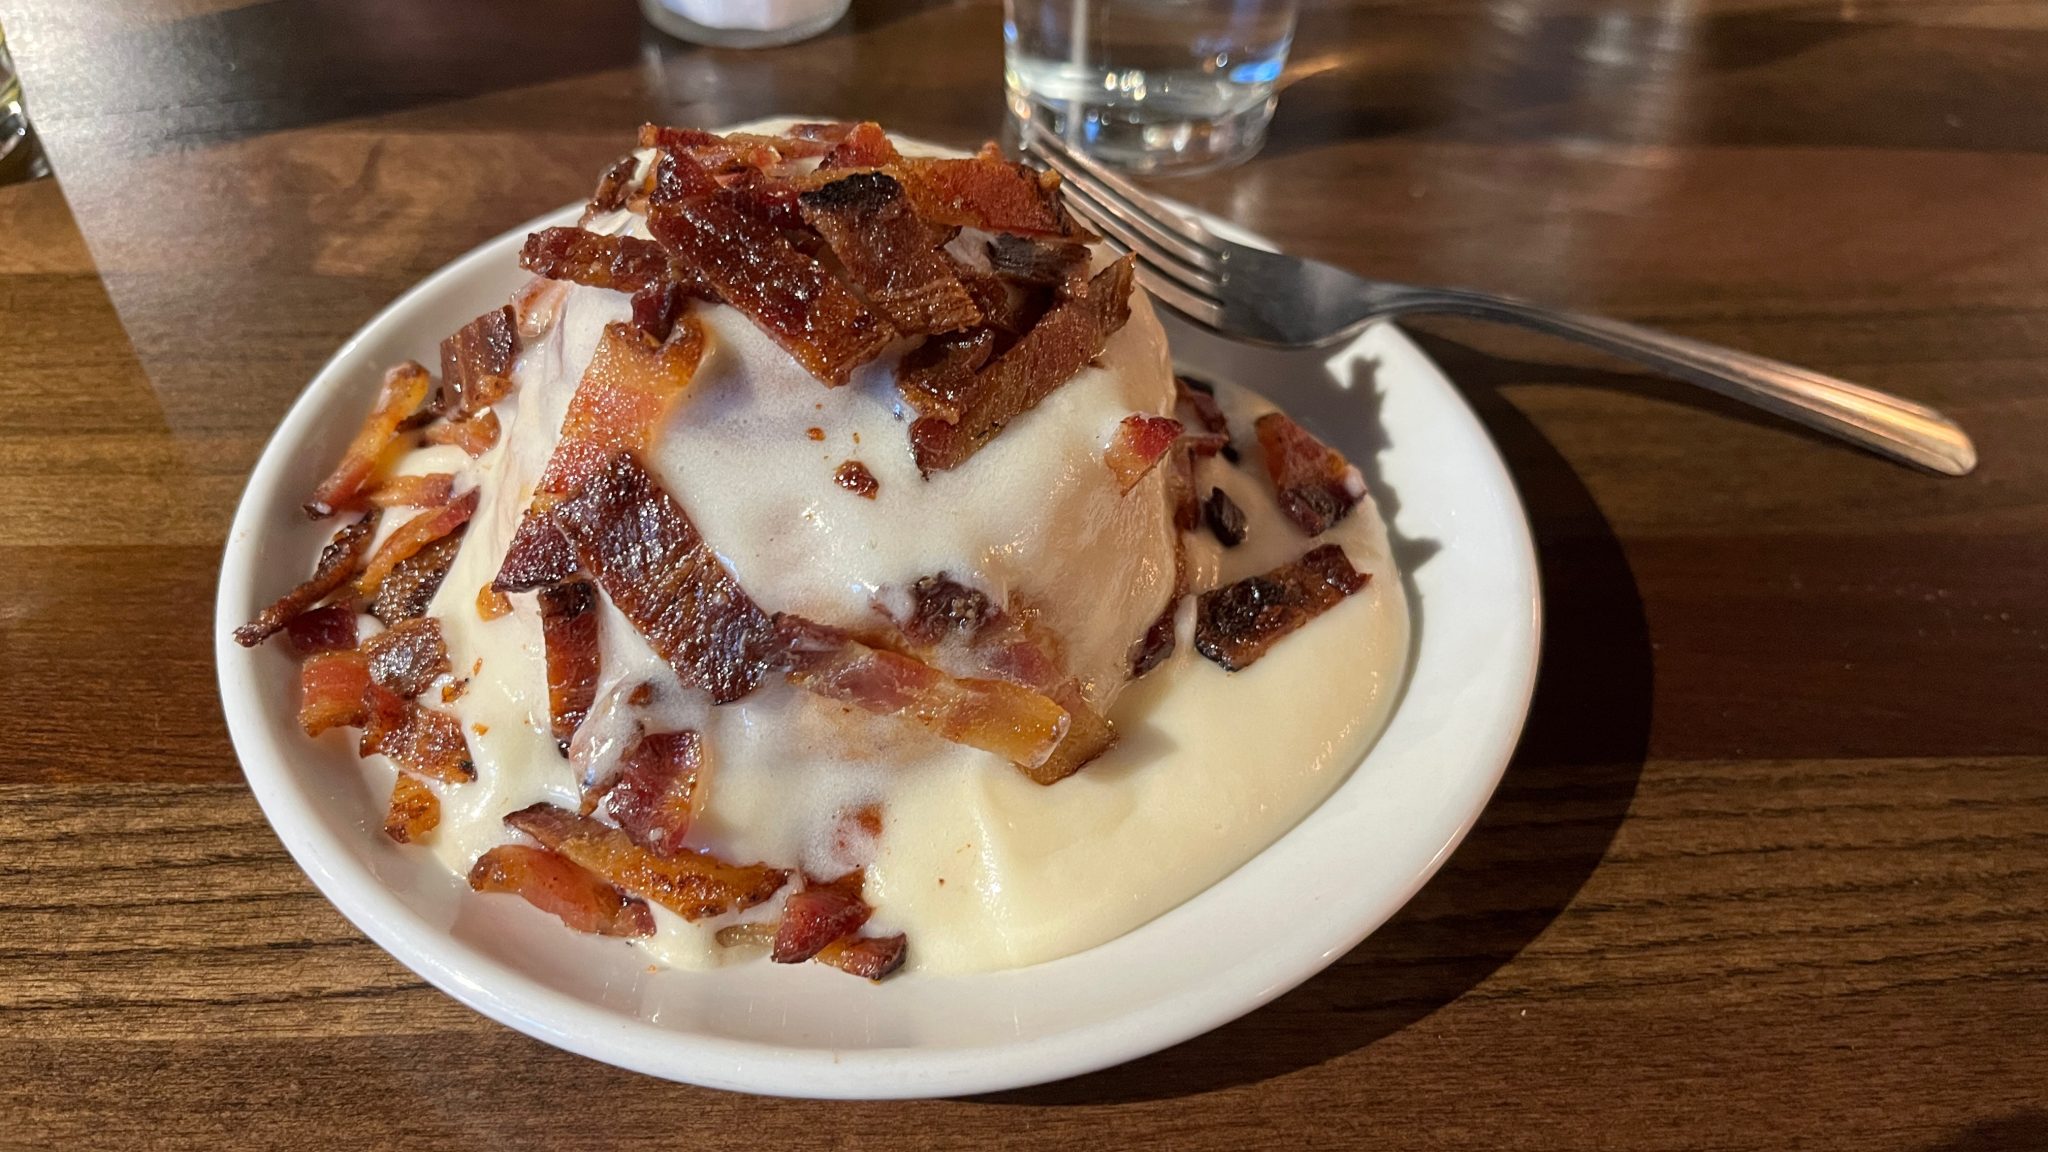 Bacon and frosting on a cinnamon roll